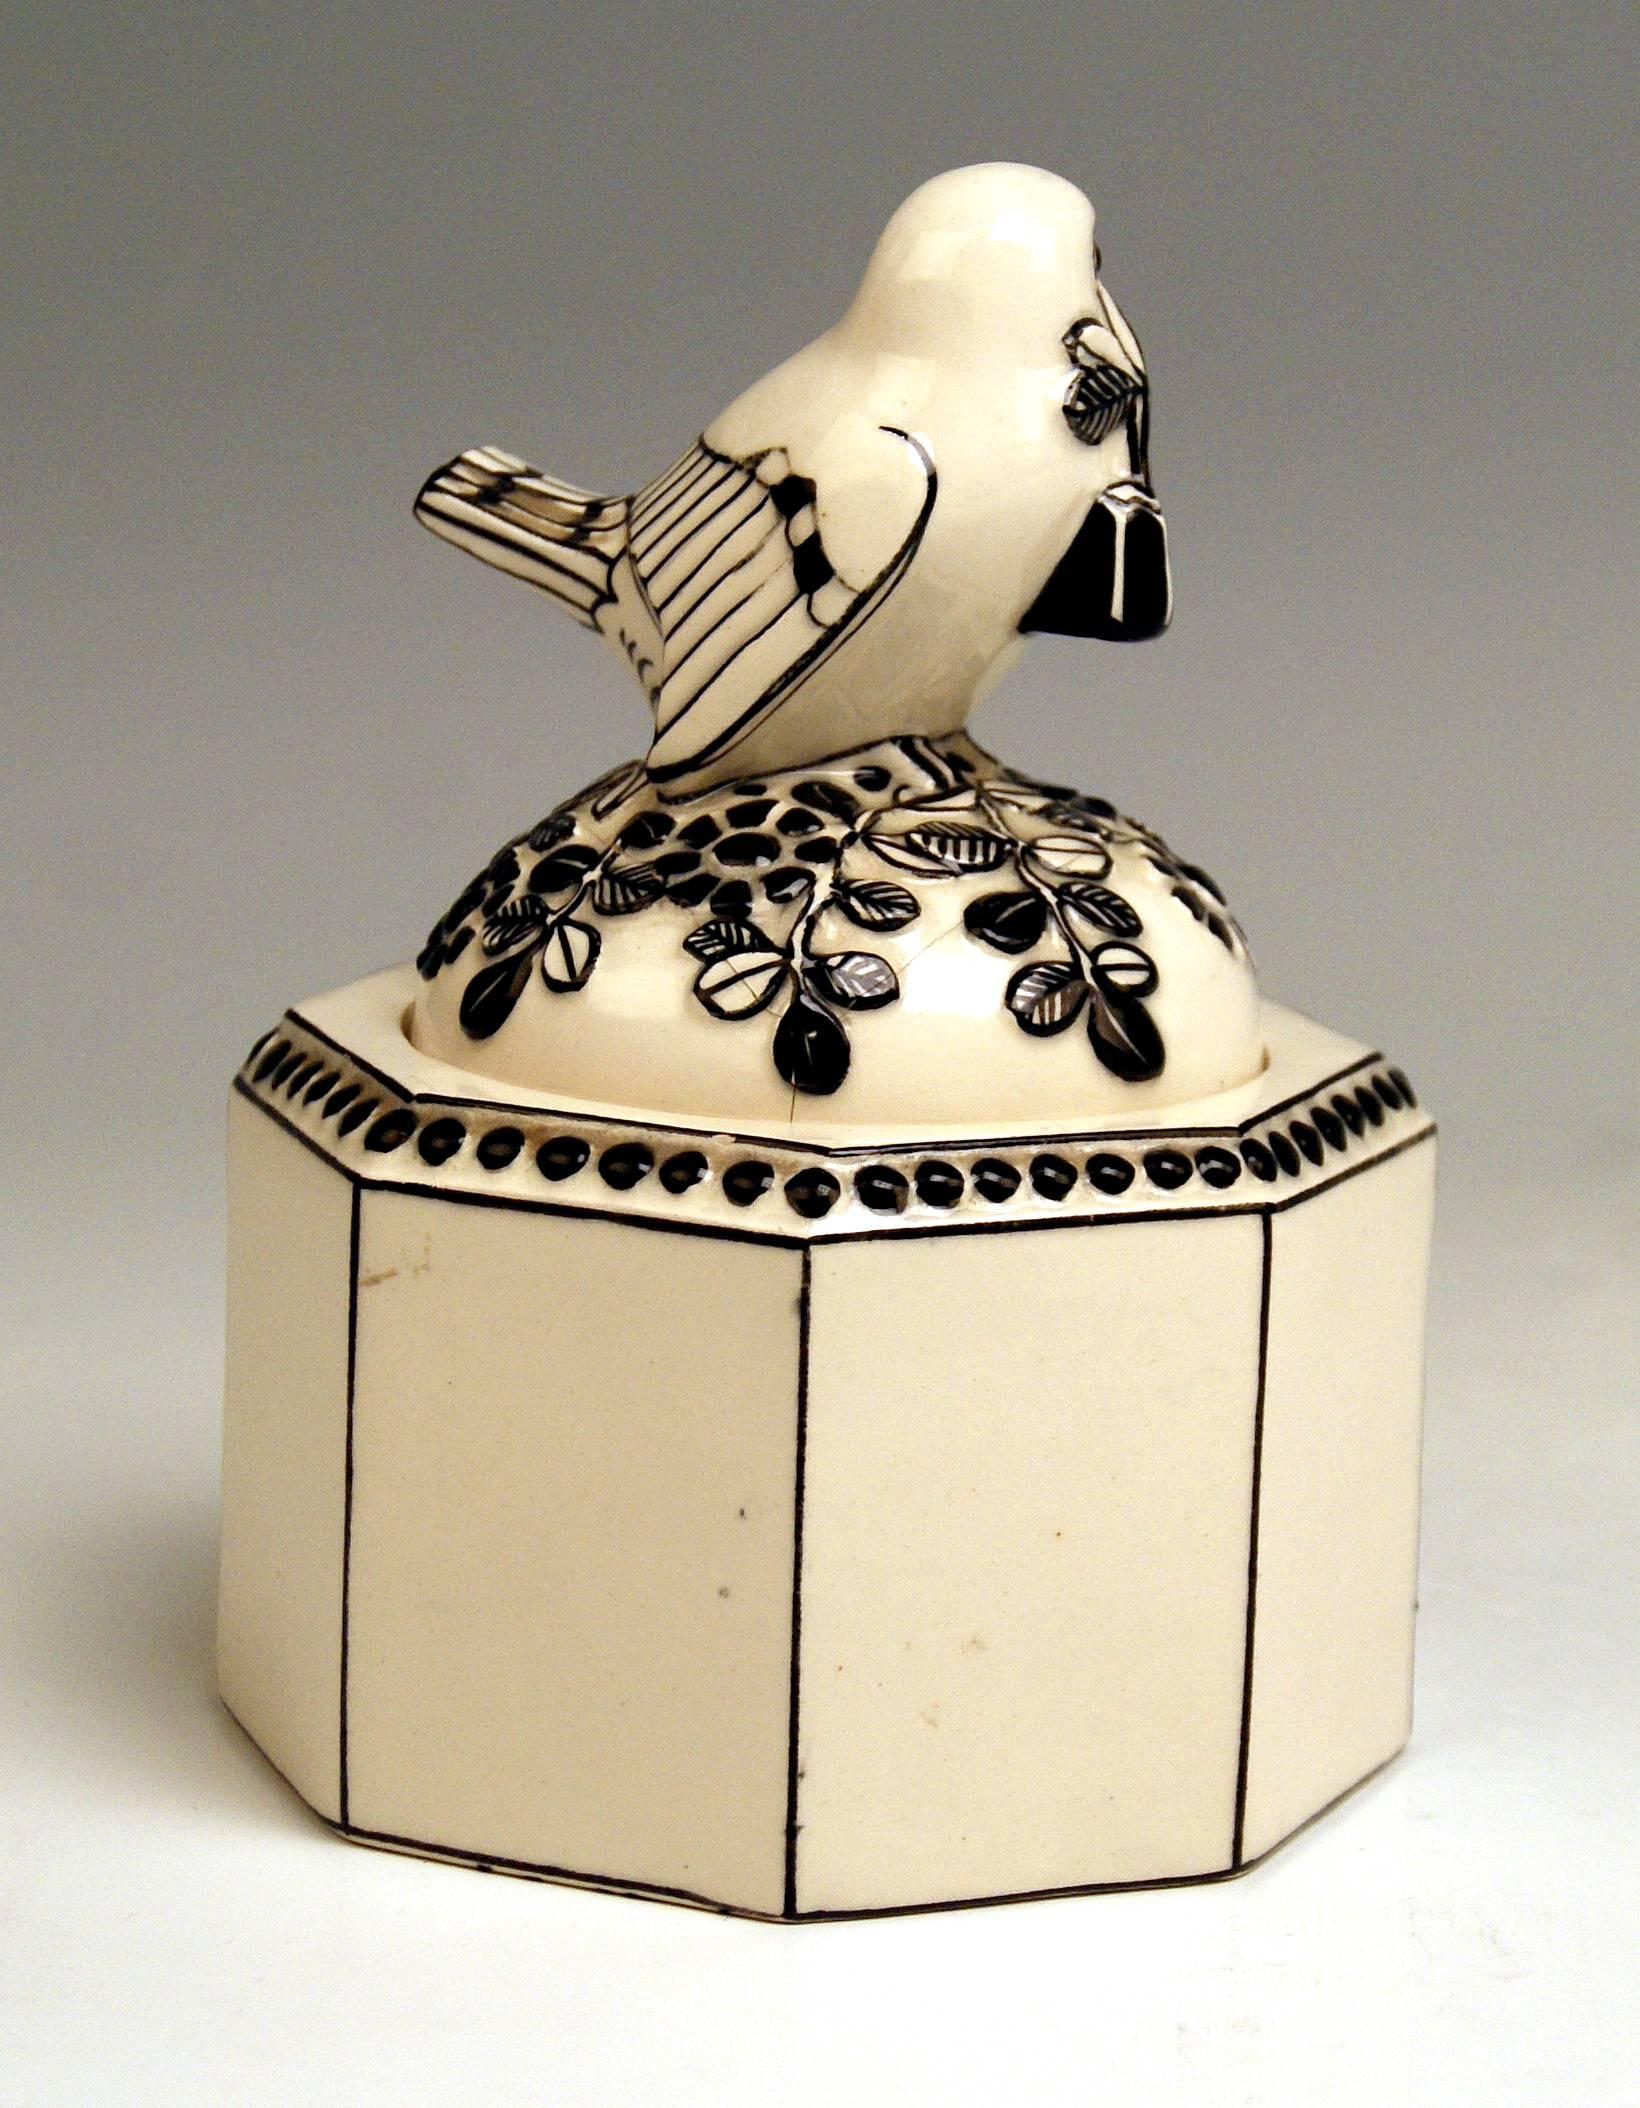 Detailed description: 
Ceramics box (eight-sided), with sparrow holding a flower's twig in beak / the bird's figurine is attached to lid
DESIGN: Michael Powolny, circa 1907

cream white and black shaded 
The domed lid of box is abundantly